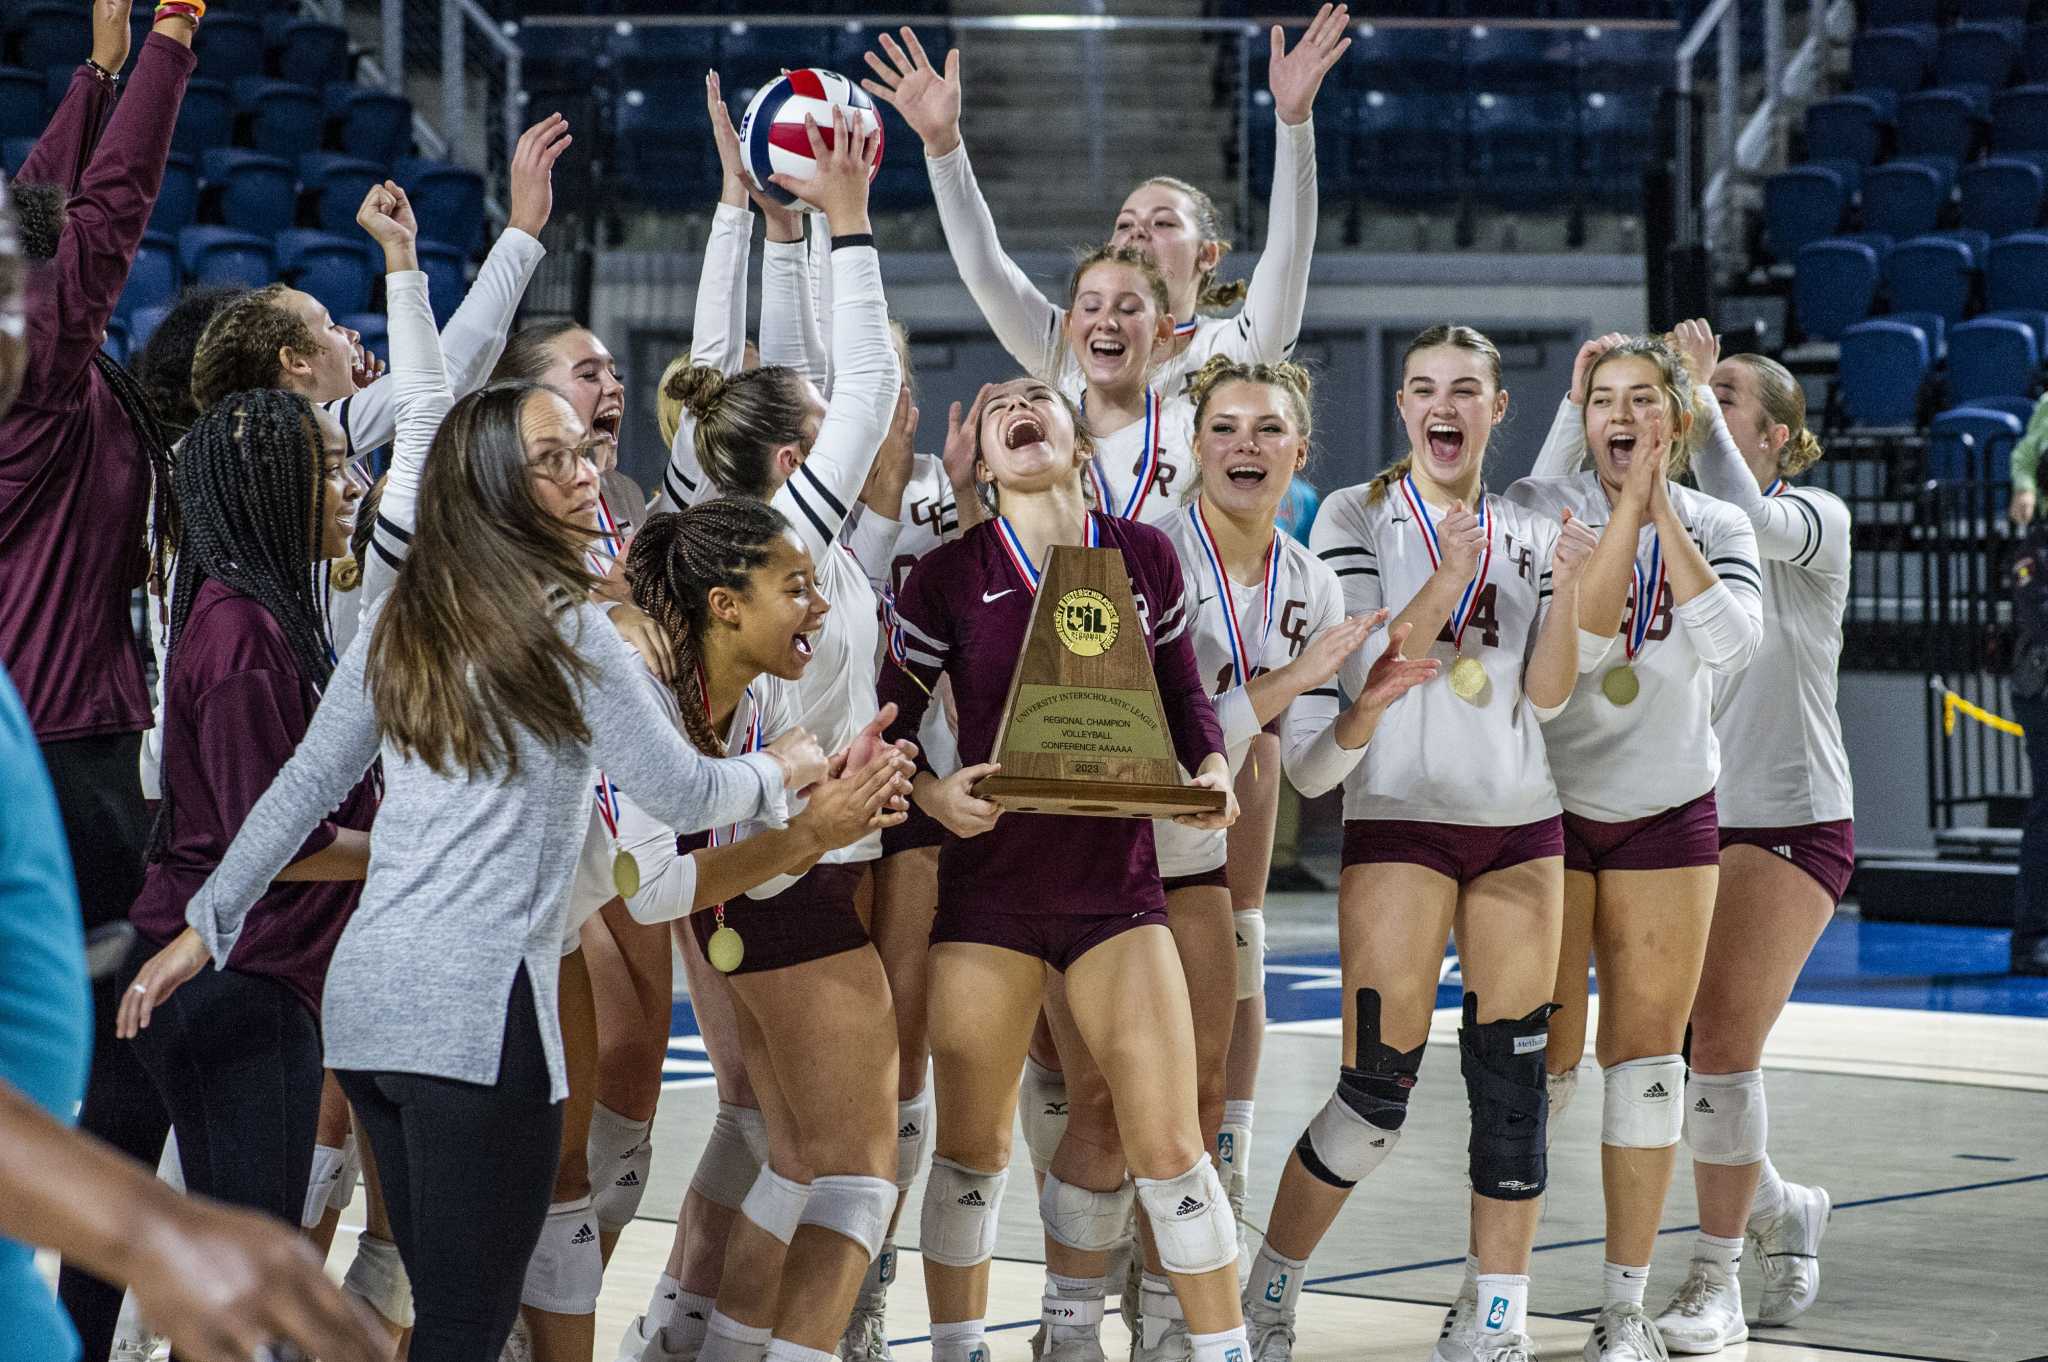 Prep Volleyball Division 1 State: Early playing time paying off